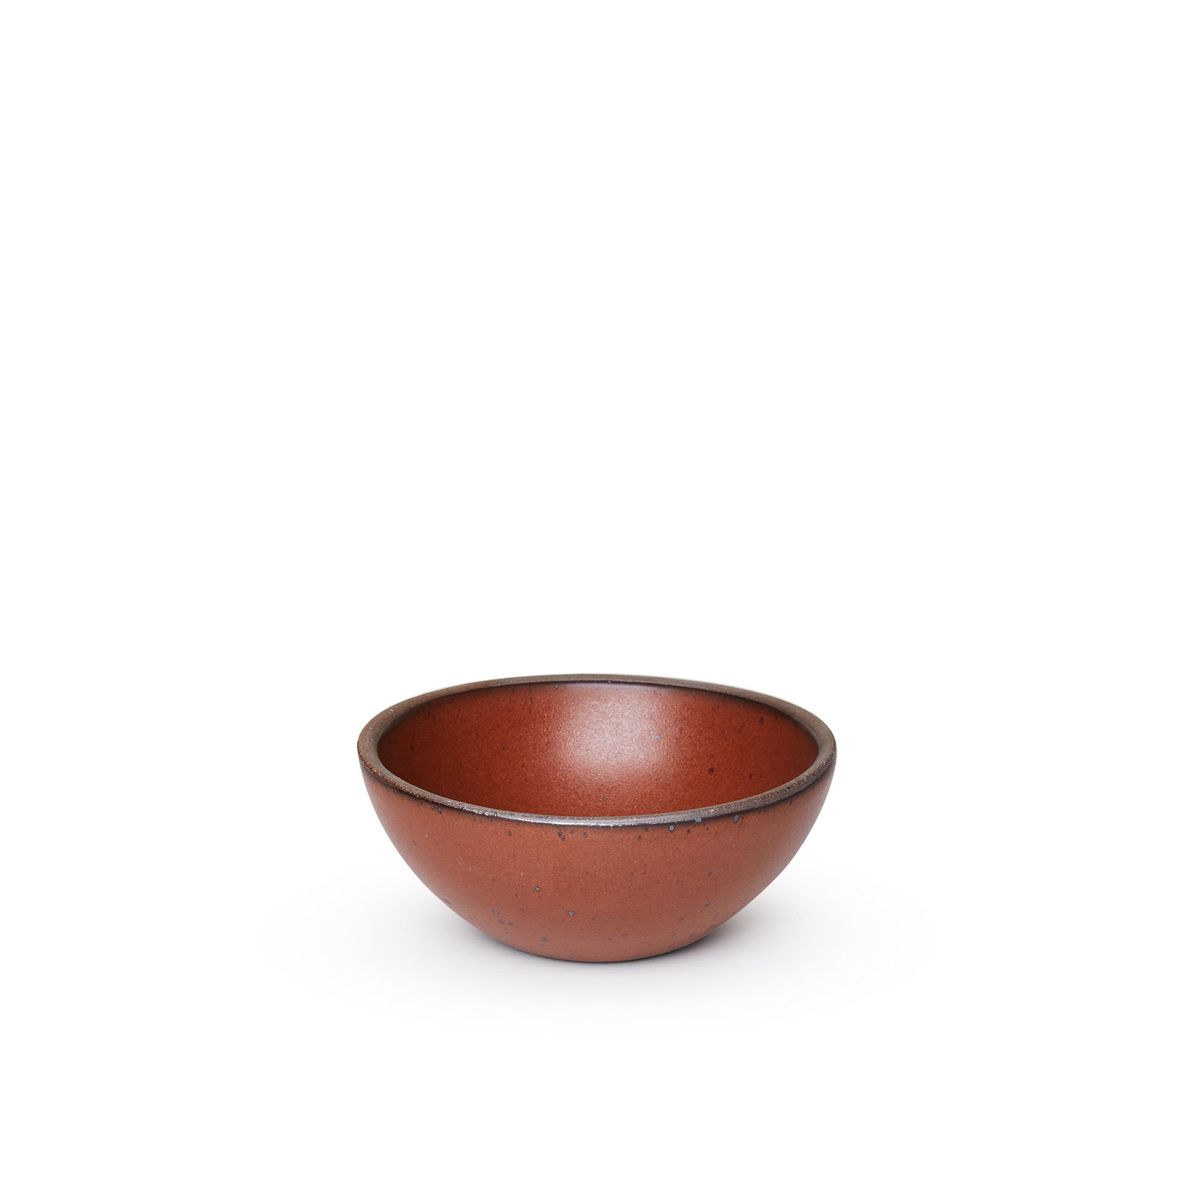 A small dessert sized rounded ceramic bowl in a cool burnt terracotta color featuring iron speckles and an unglazed rim